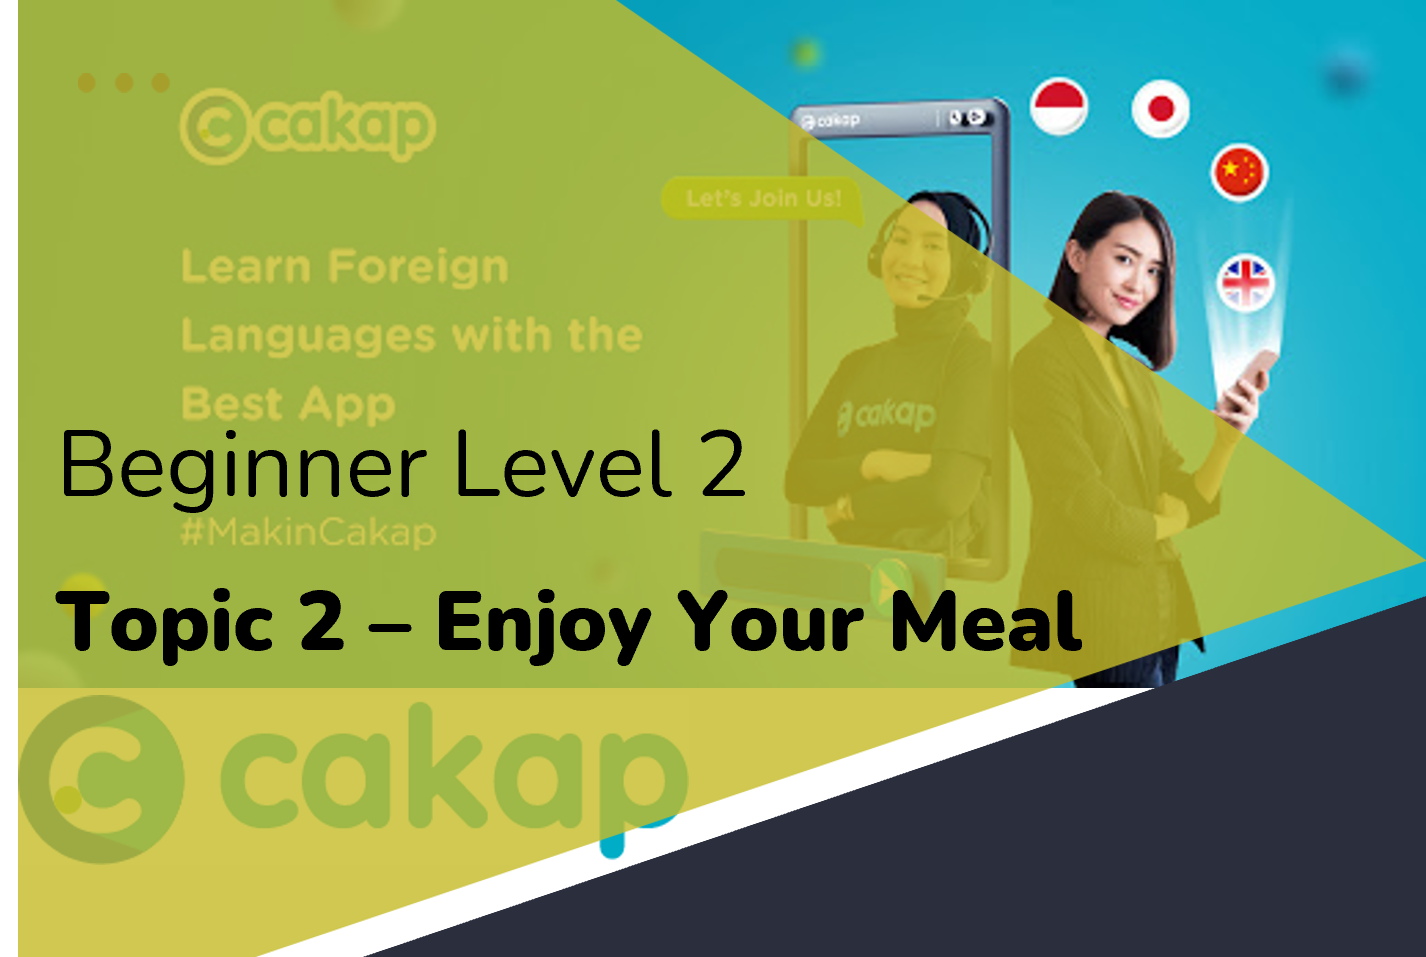 Beginner 2: Topic 2 - Enjoy Your Meal